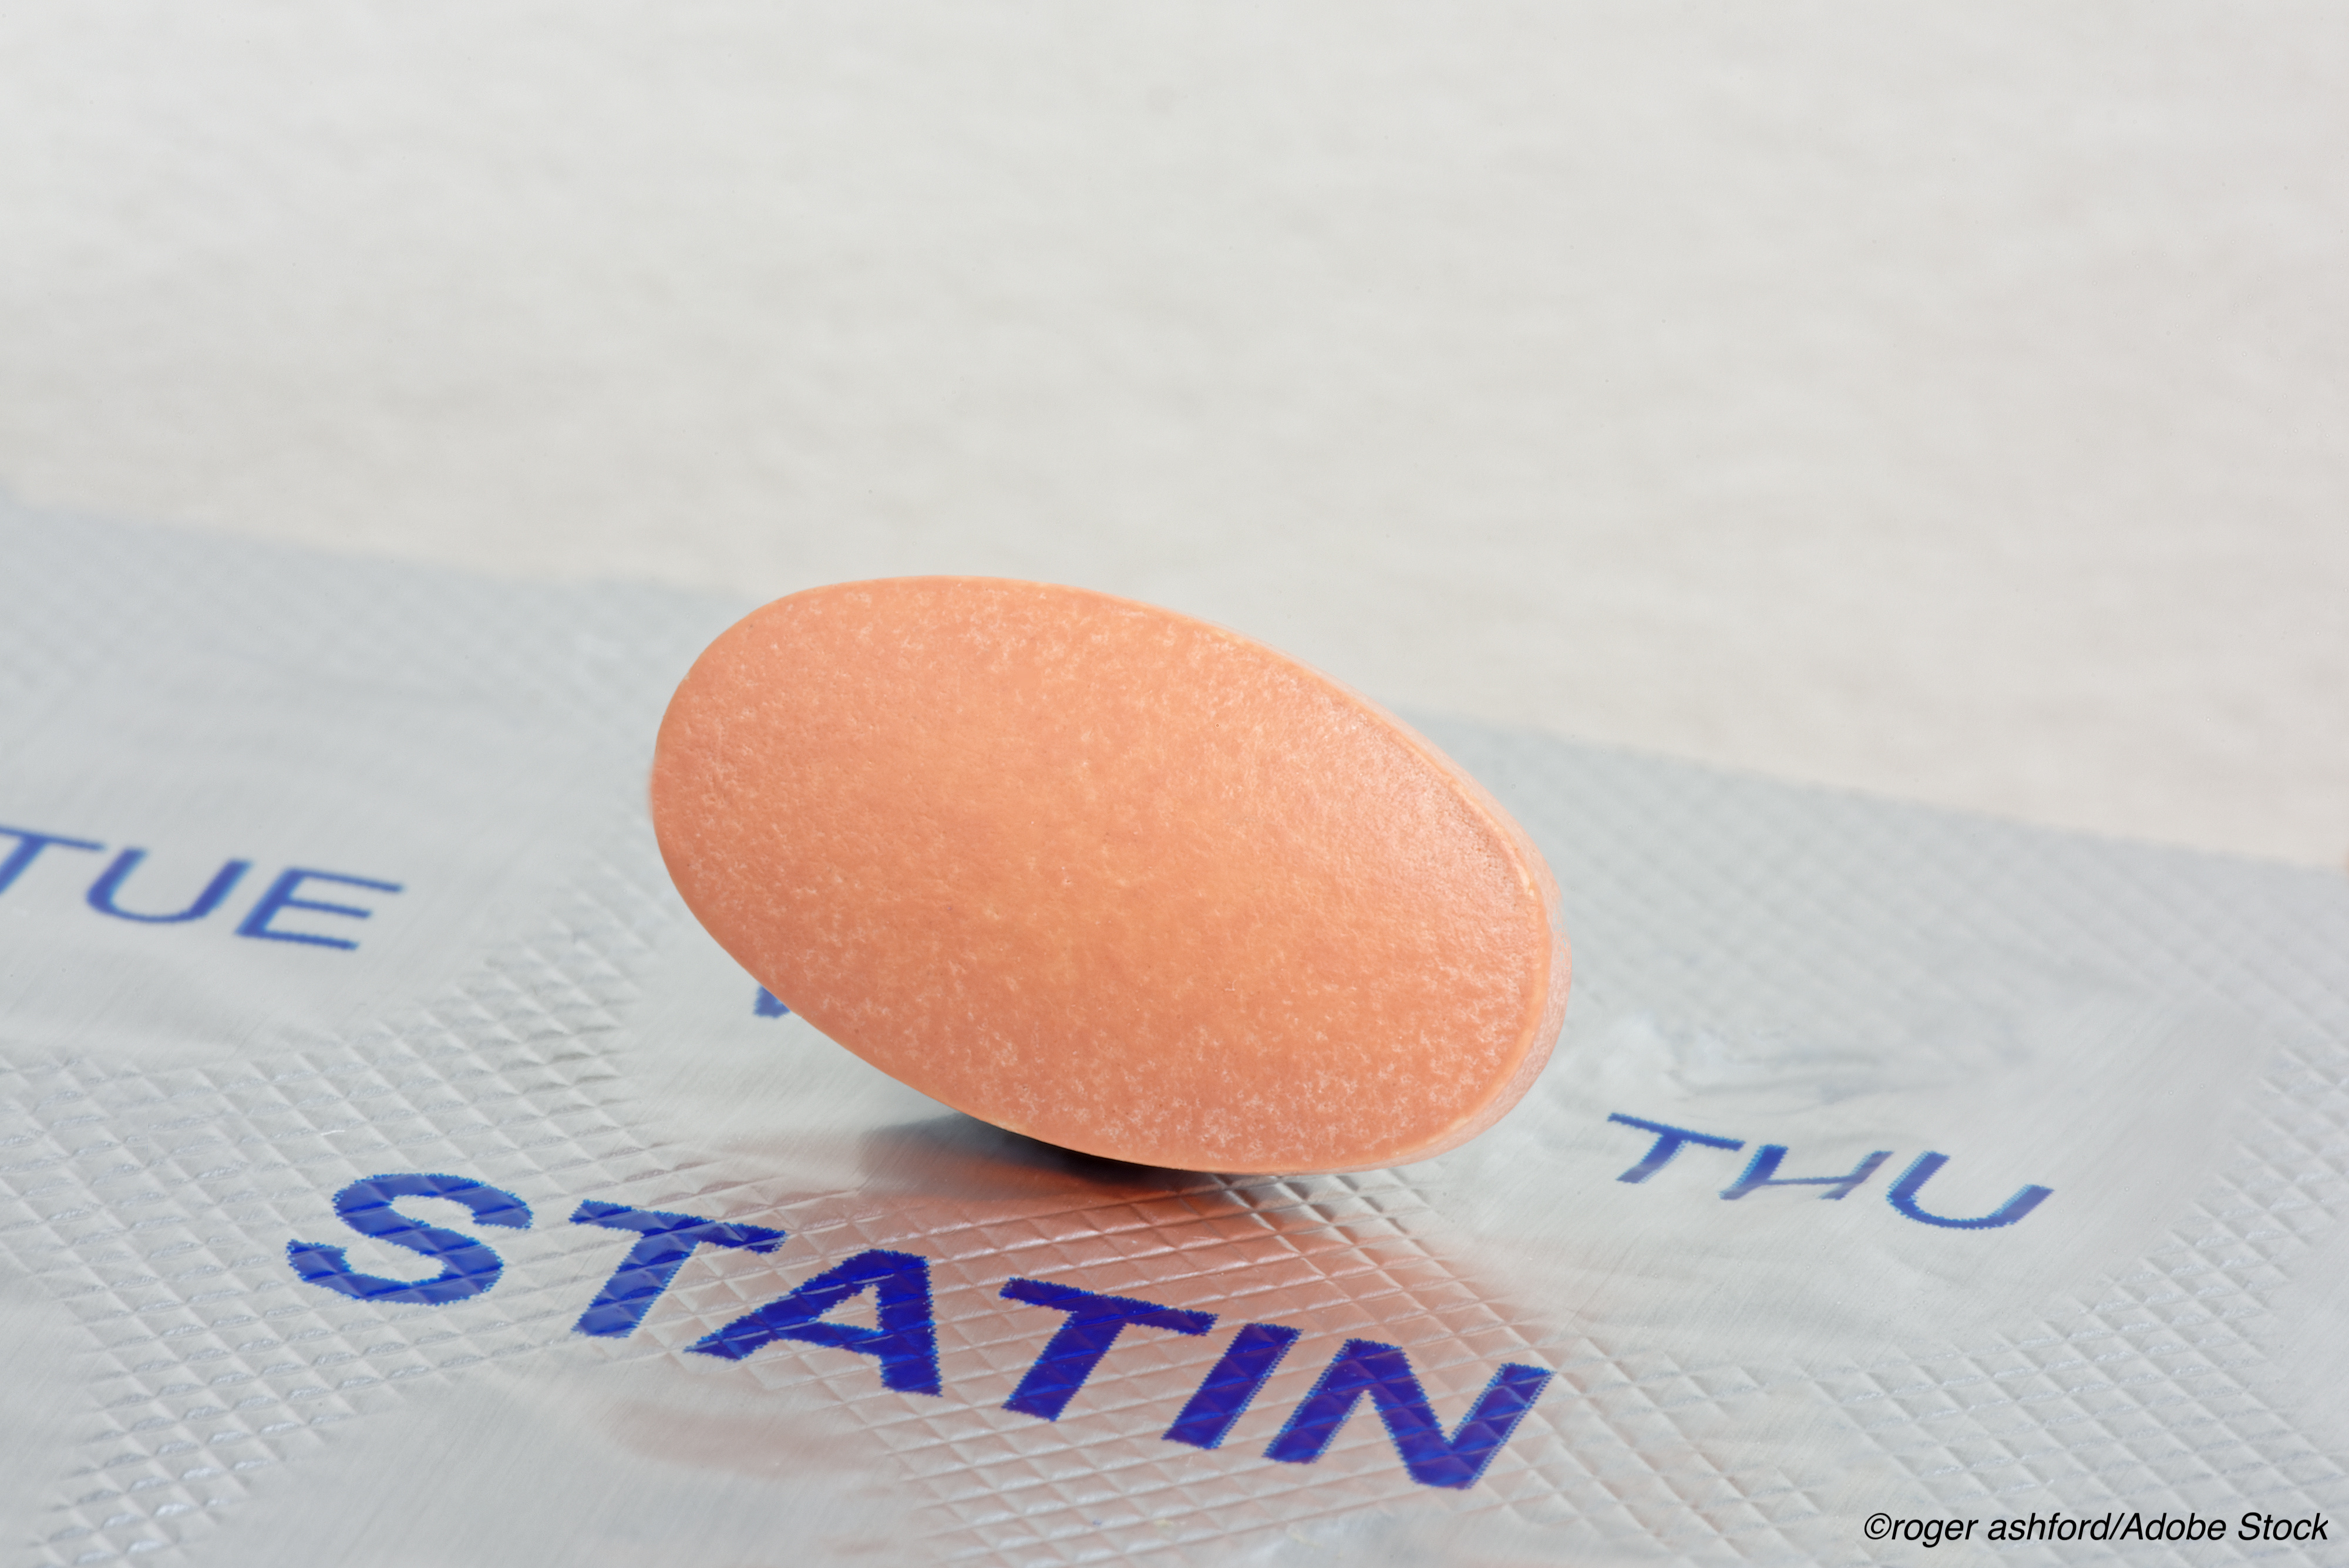 Whether Statin or Placebo, Patients Report Side Effects
